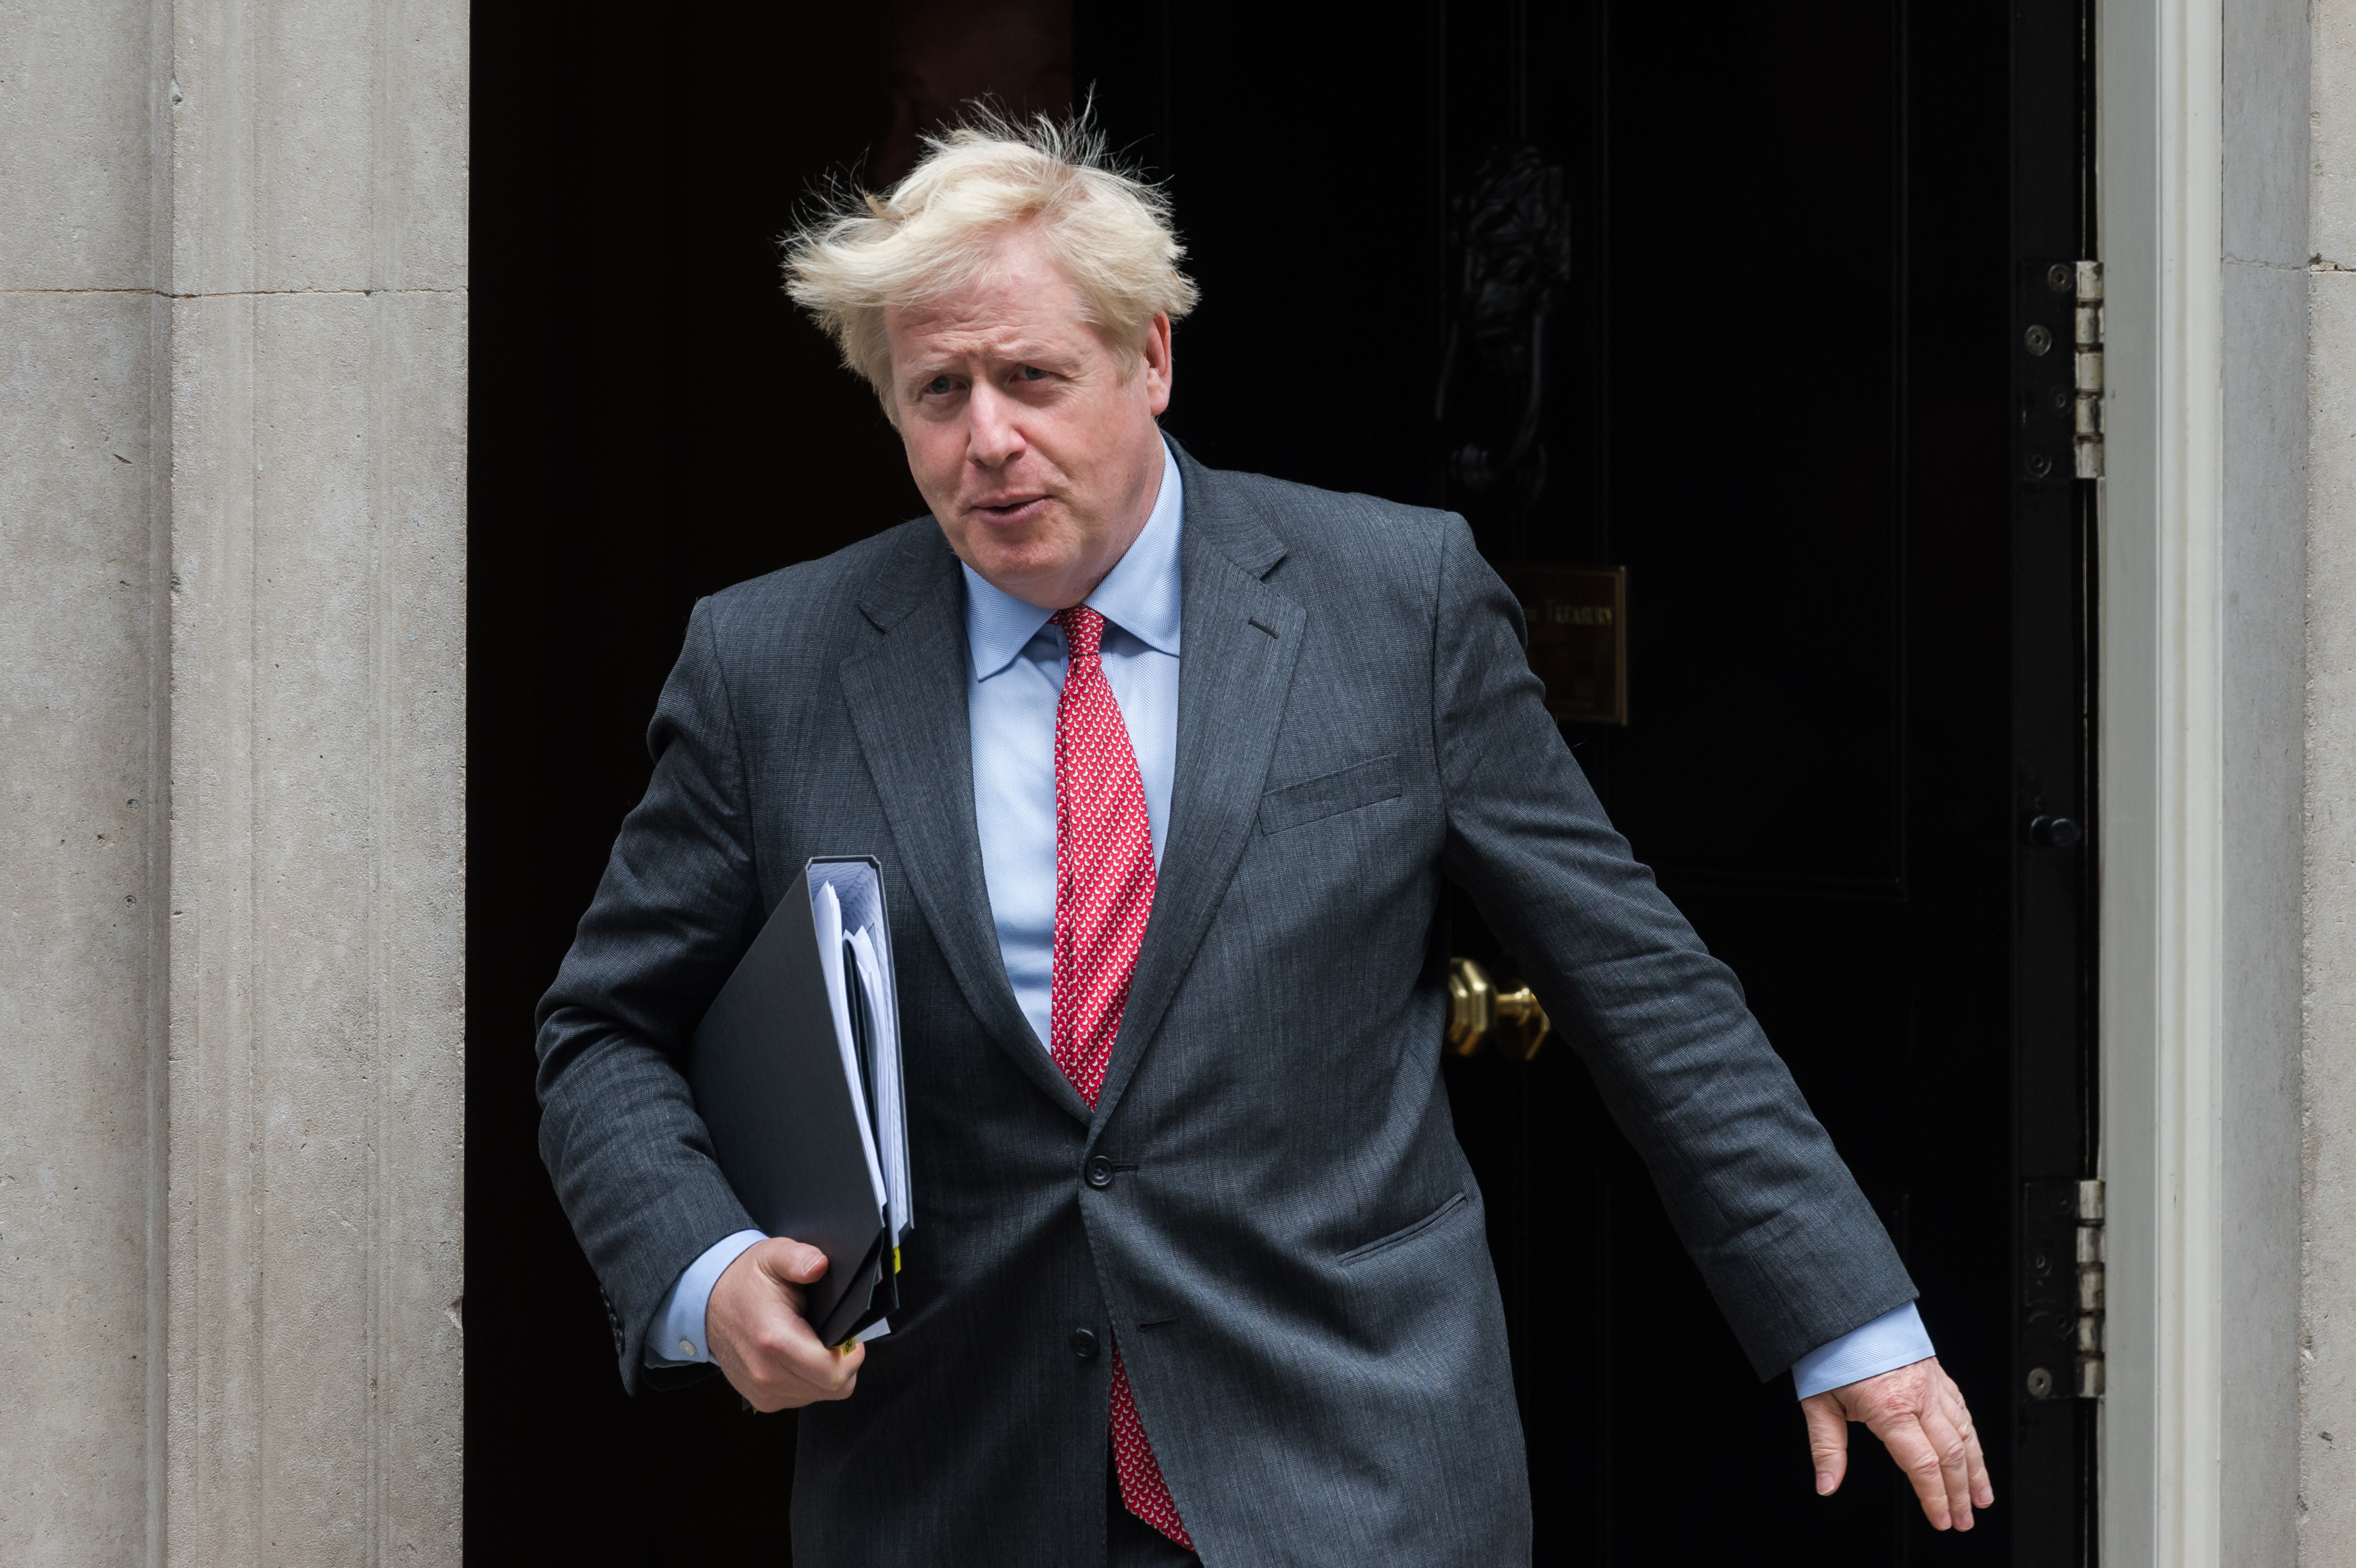 British Prime Minister Boris Johnson leaves 10 Downing Street for the House of Commons to deliver a statement on tightening coronavirus restrictions amid widespread increase in daily infection rates across the U.K., on 22 September, 2020 (NurPhoto via Getty Images—WIktor Szymanowicz/NurPhoto)